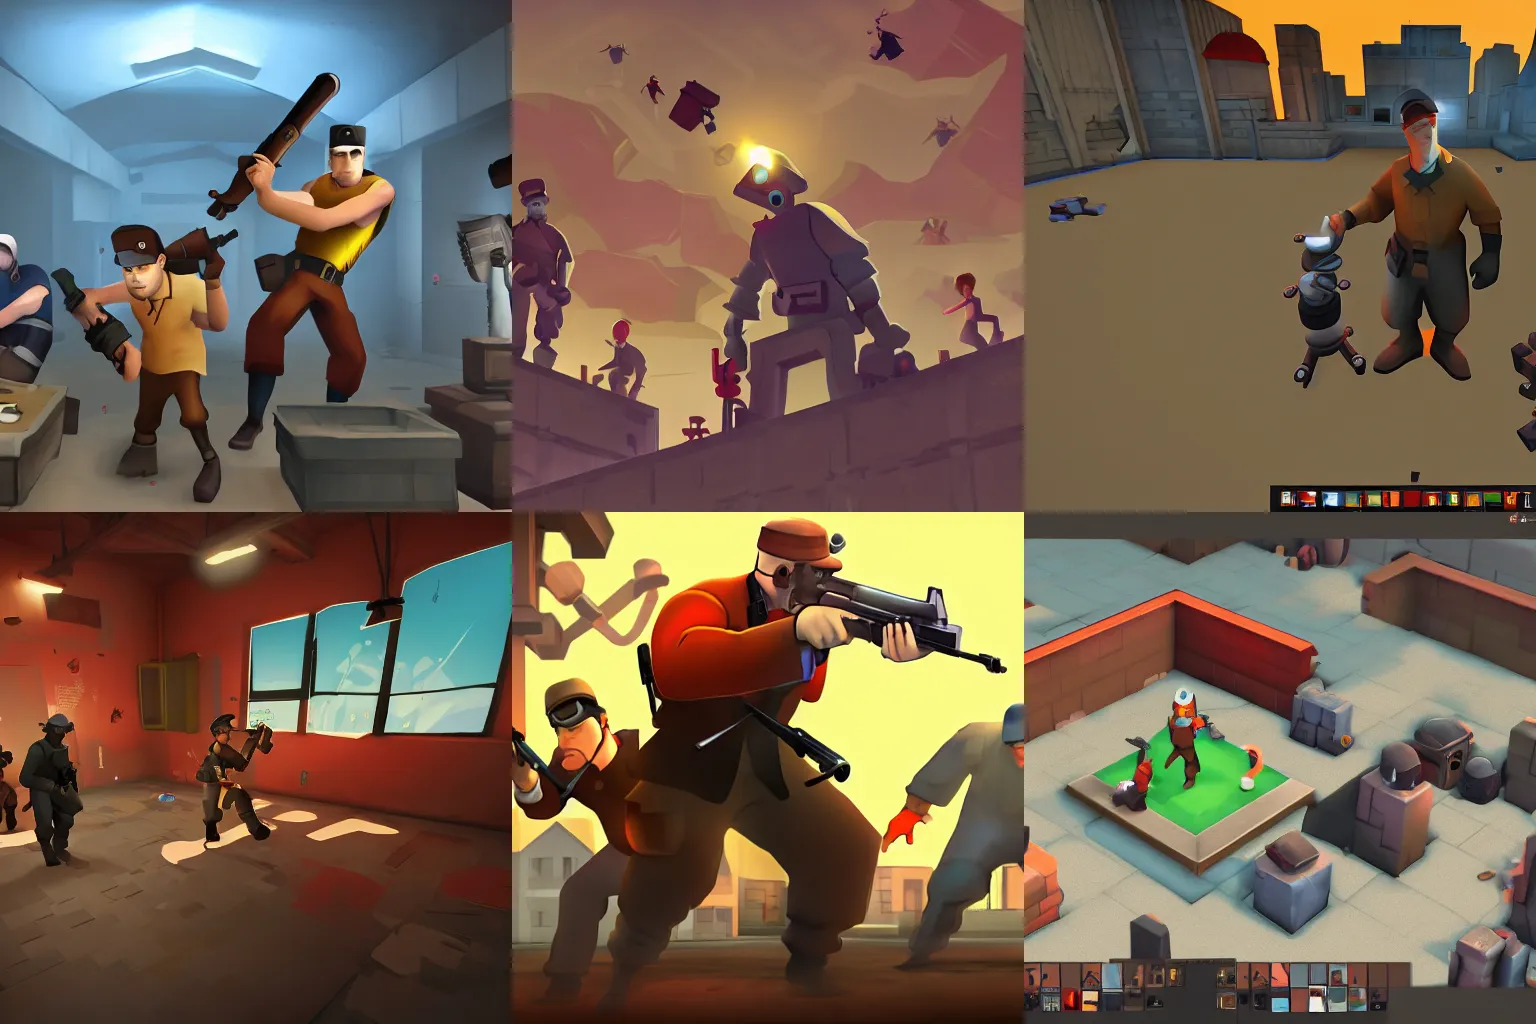 Prompt: team fortress 2 rendered as an artistic indie game